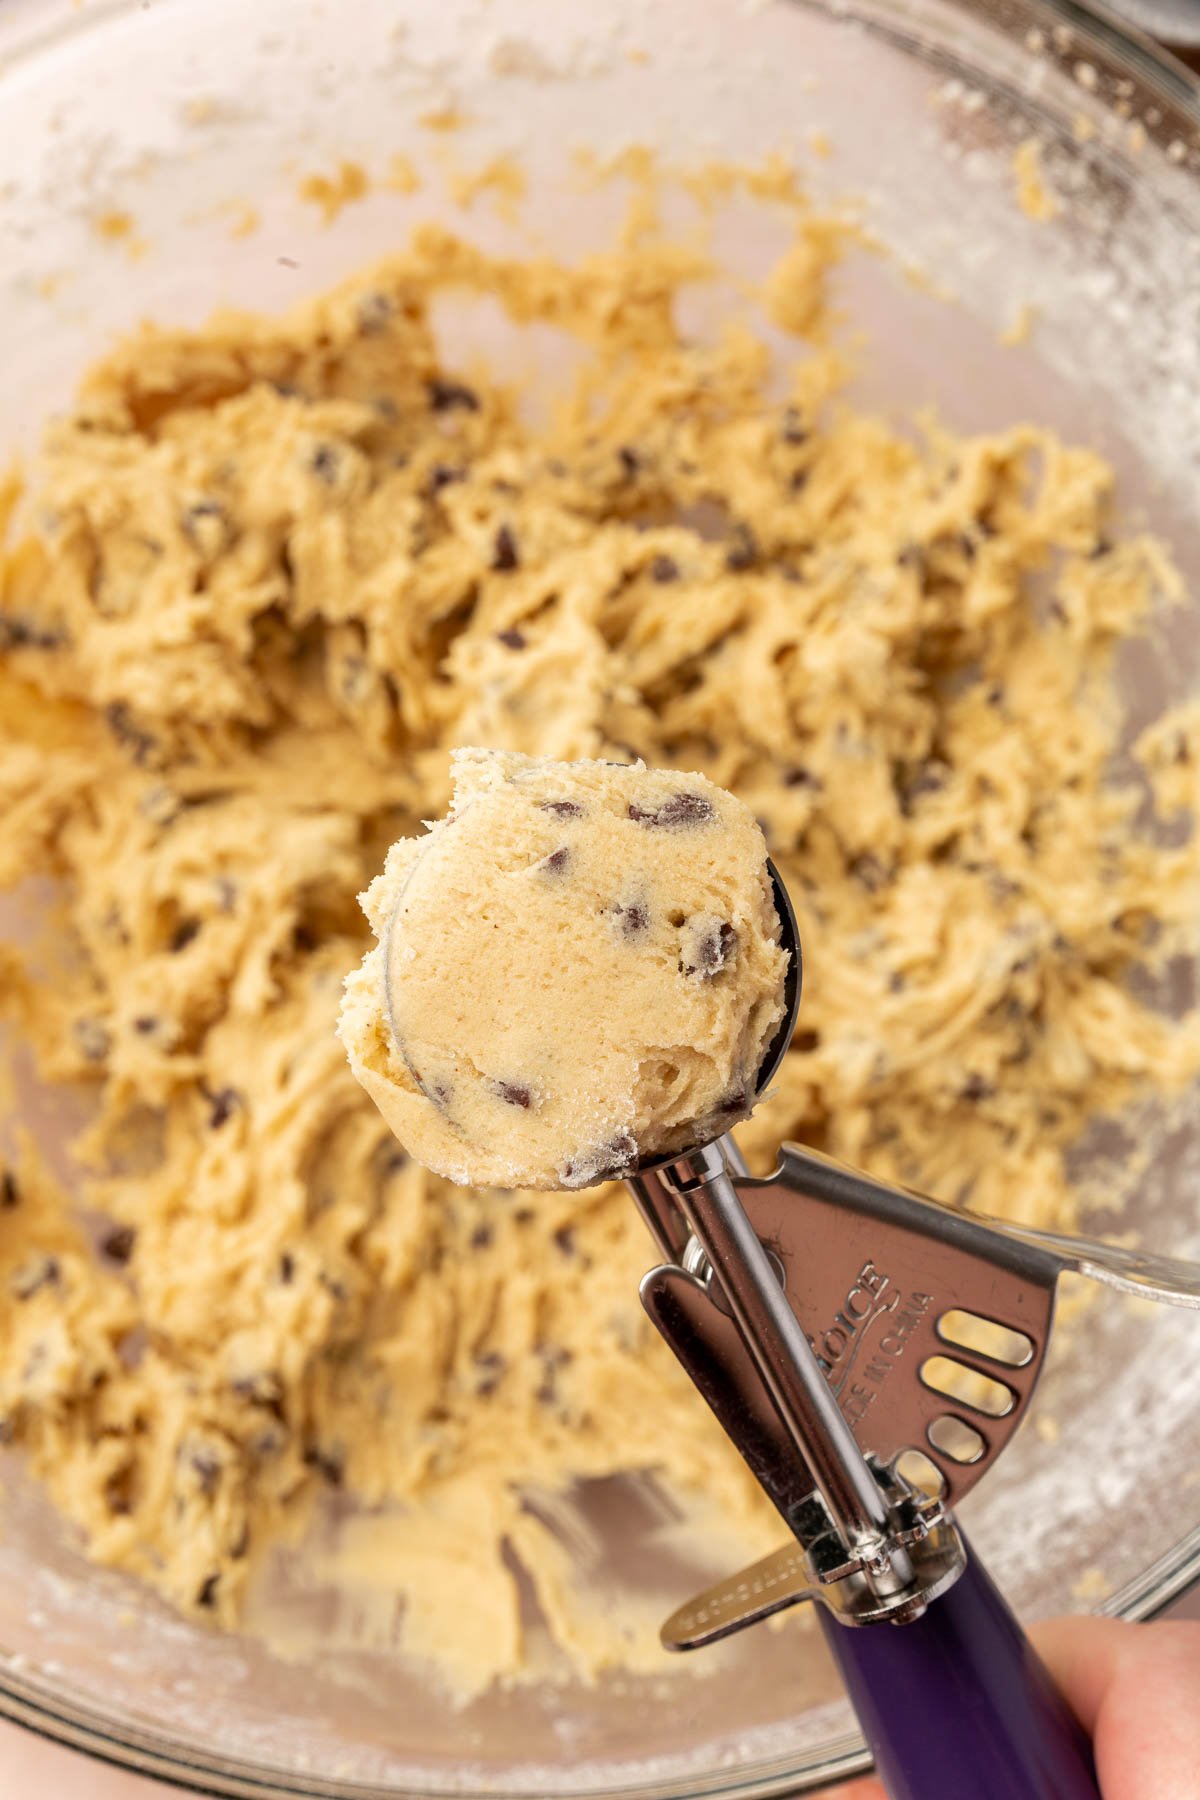 A portion scoop of gluten-free chocolate chip cookie dough over a mixing bowl of additional cookie dough.